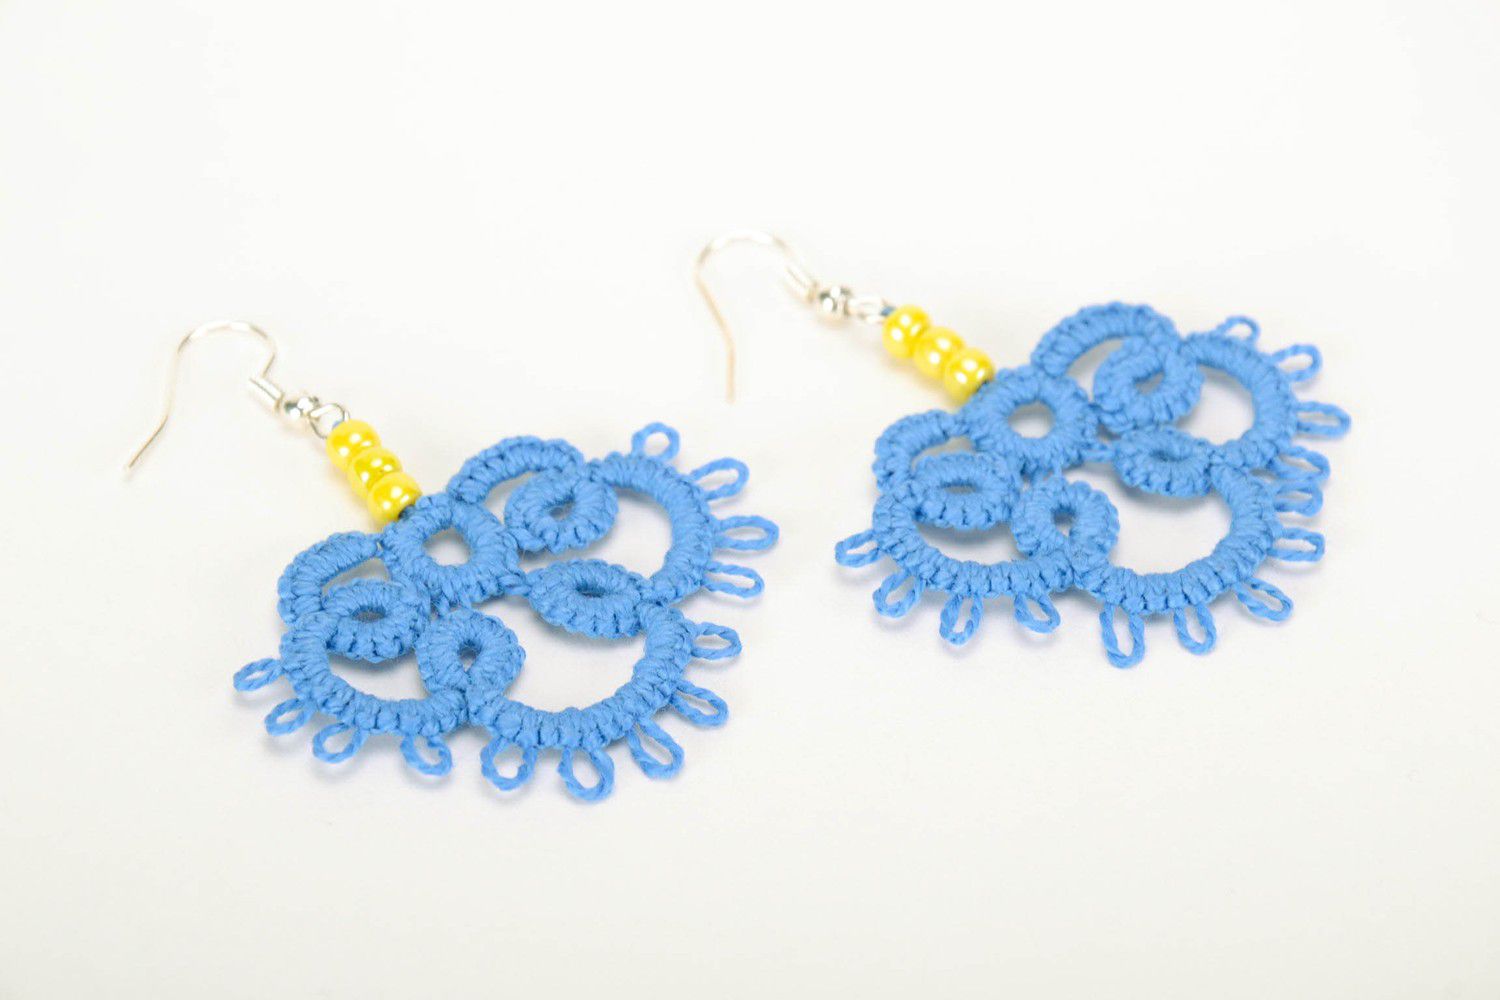 Handmade lace earrings made using tatting technique photo 1